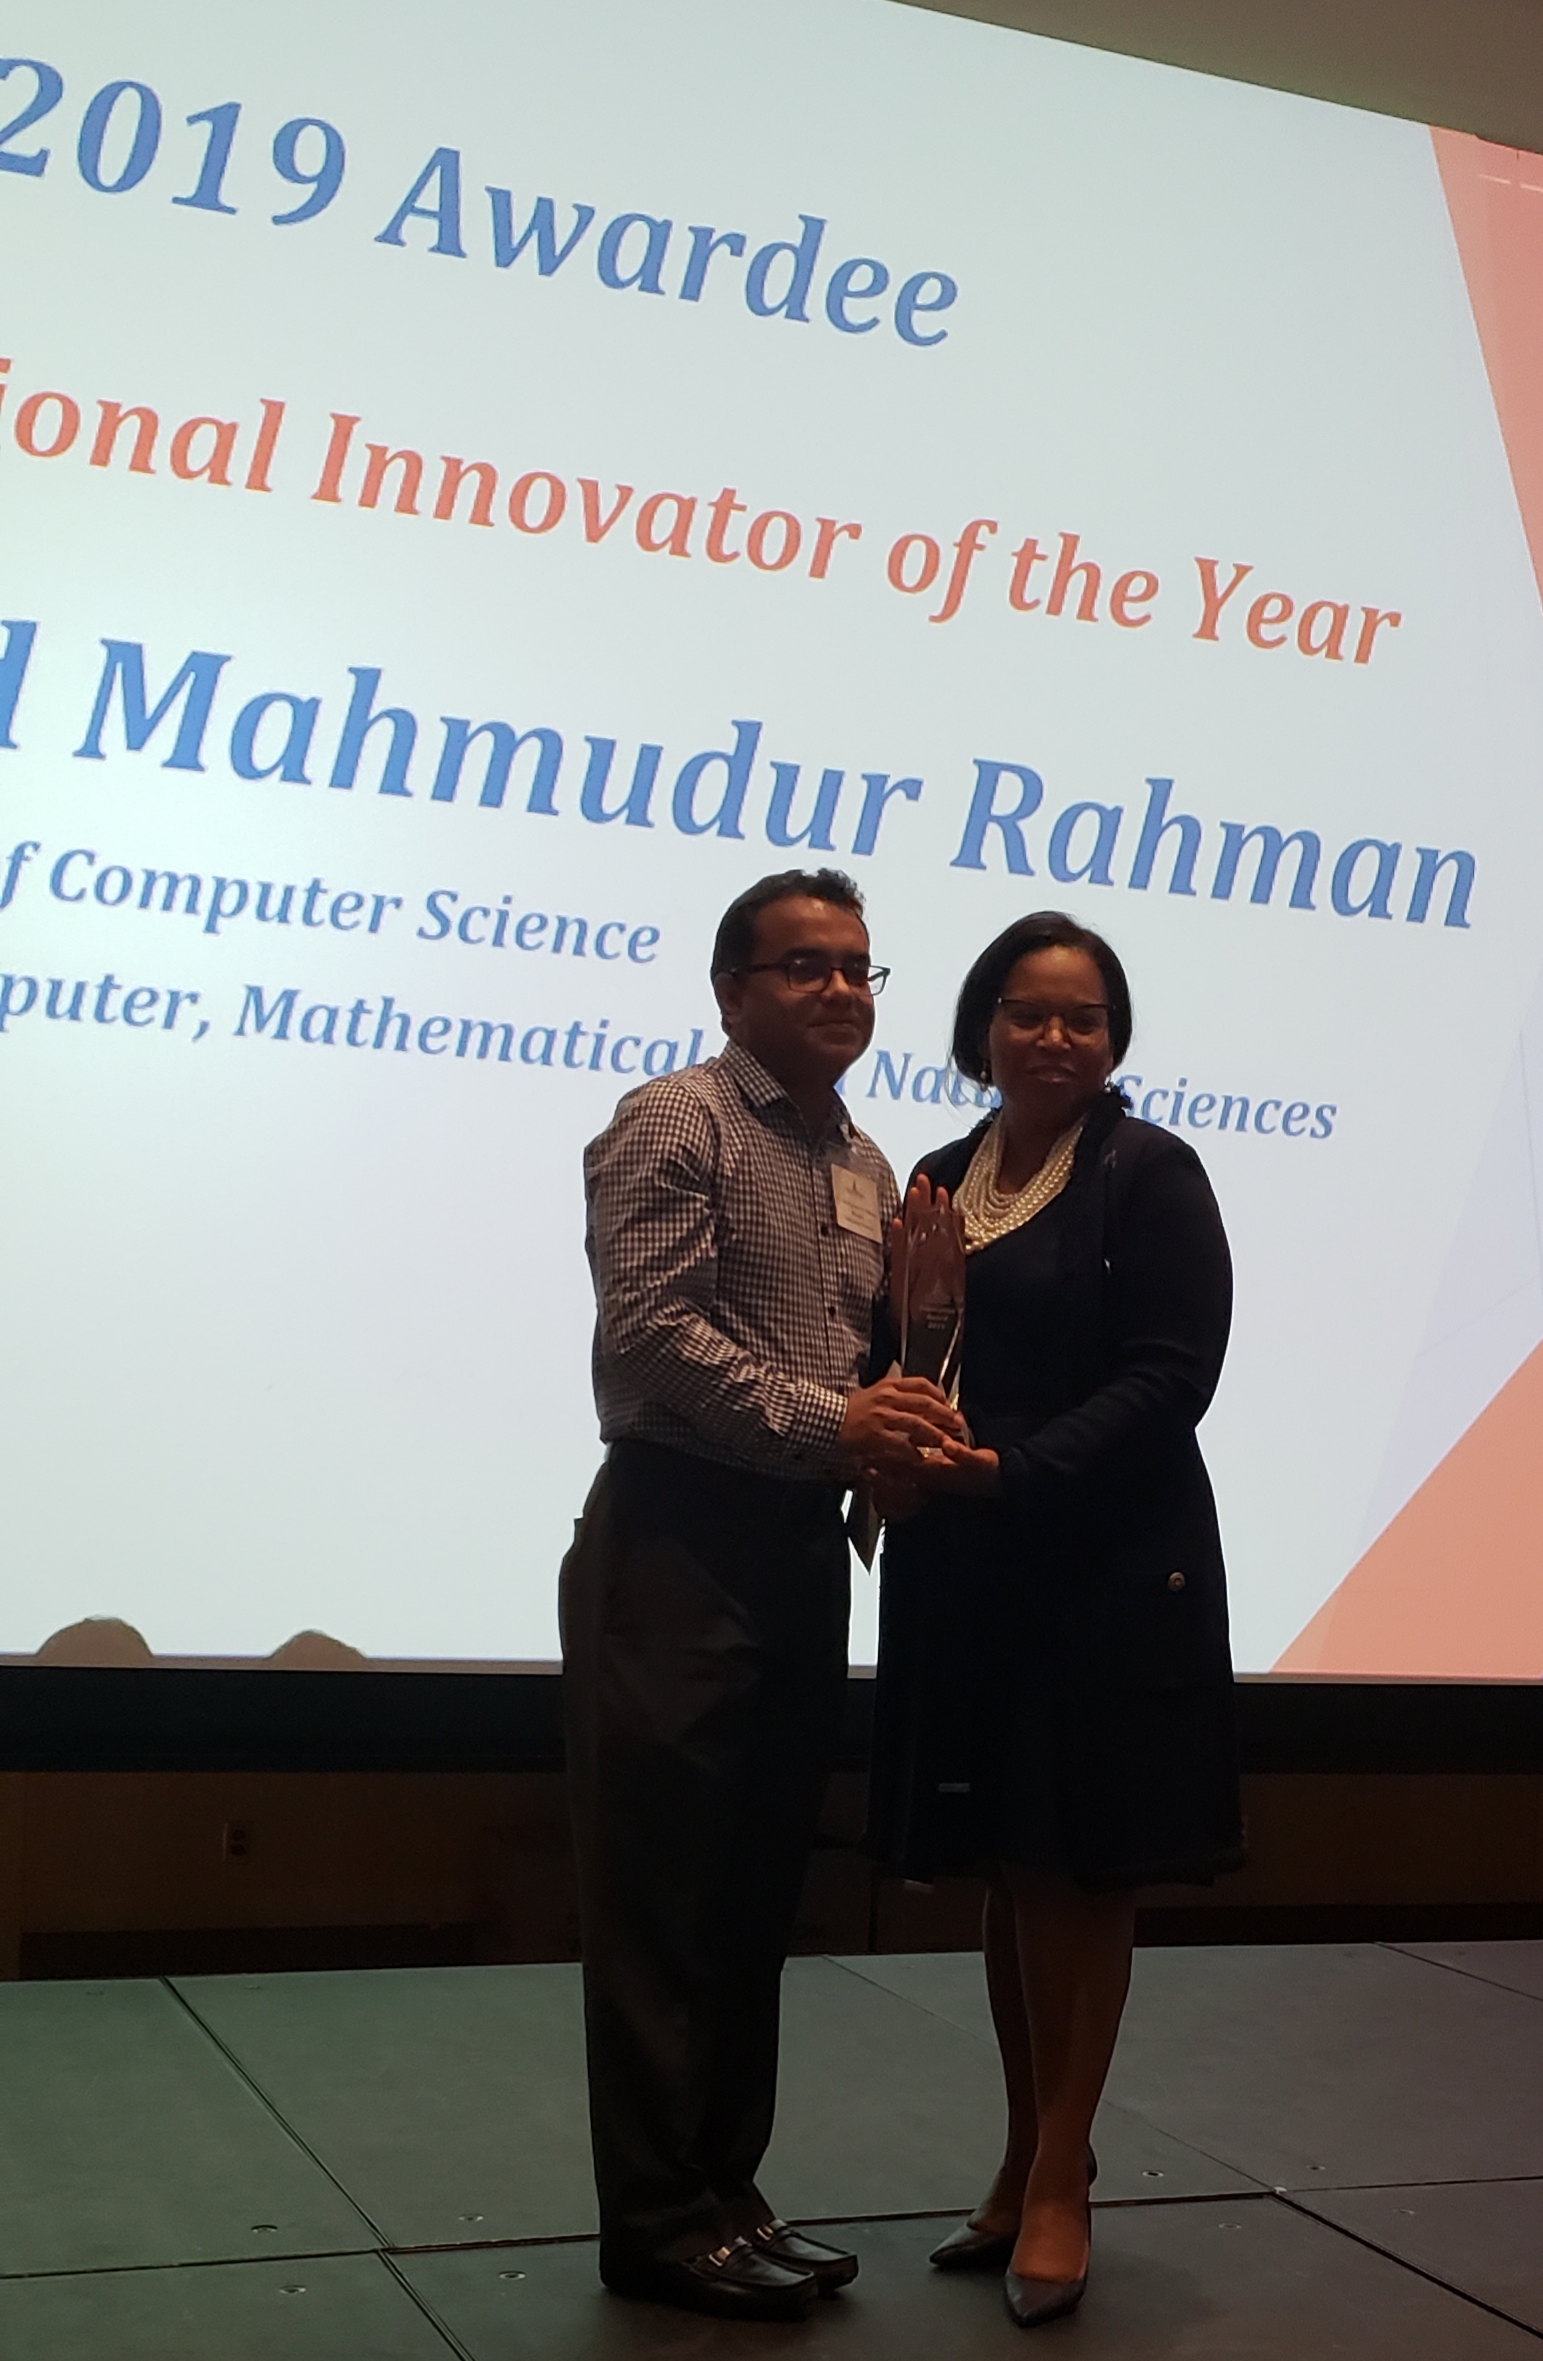 Dr. Rahman for receiving Morgans Innovation of the Year Award